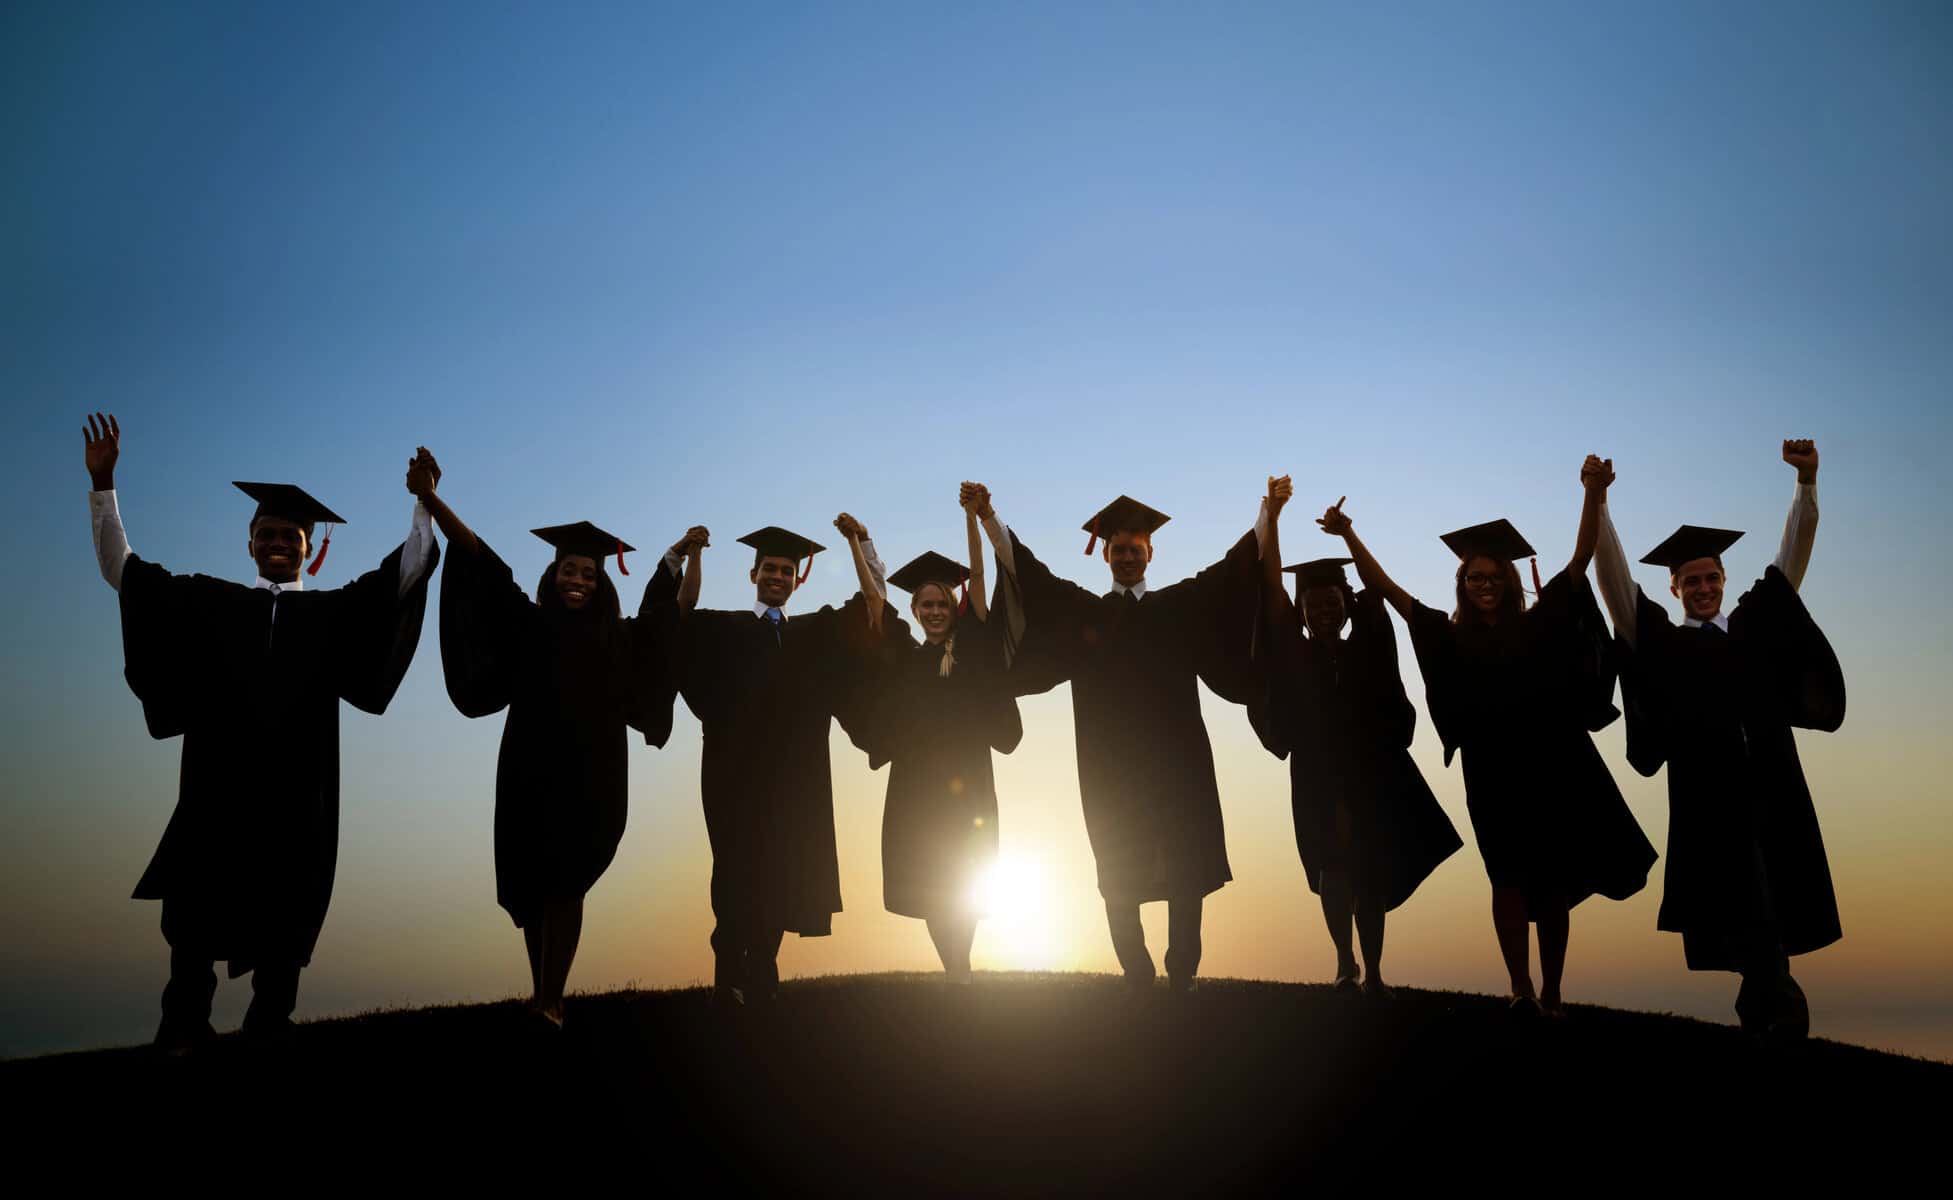 Photo of 8 high school graduate students in their caps and gowns at sunset.